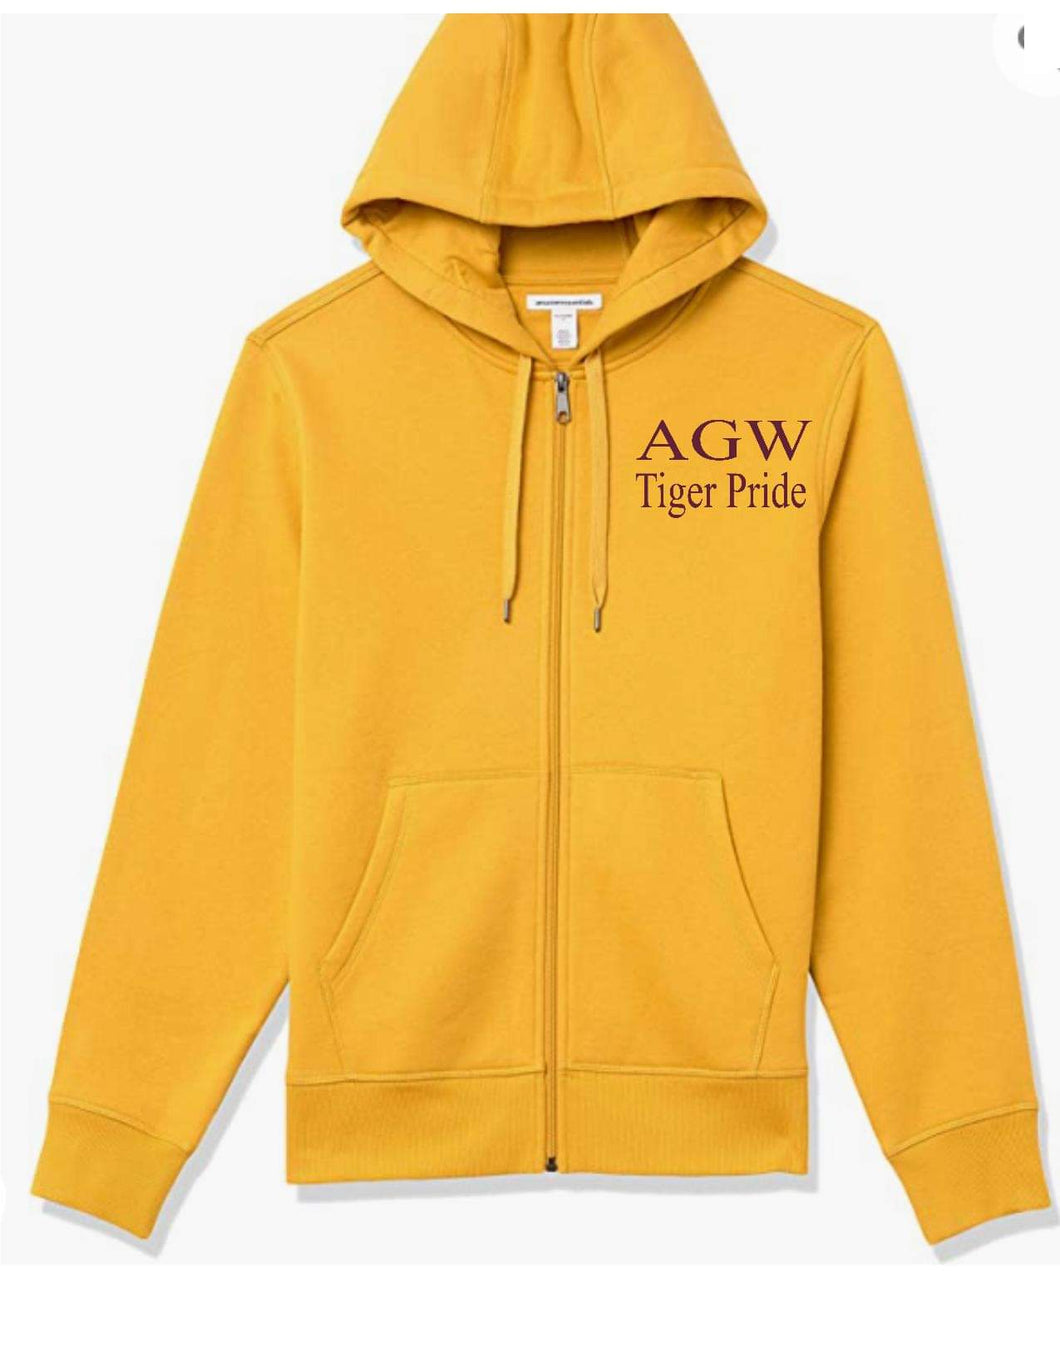 Gold Zippered Hoodie with AGWTP embroidery in maroon thread